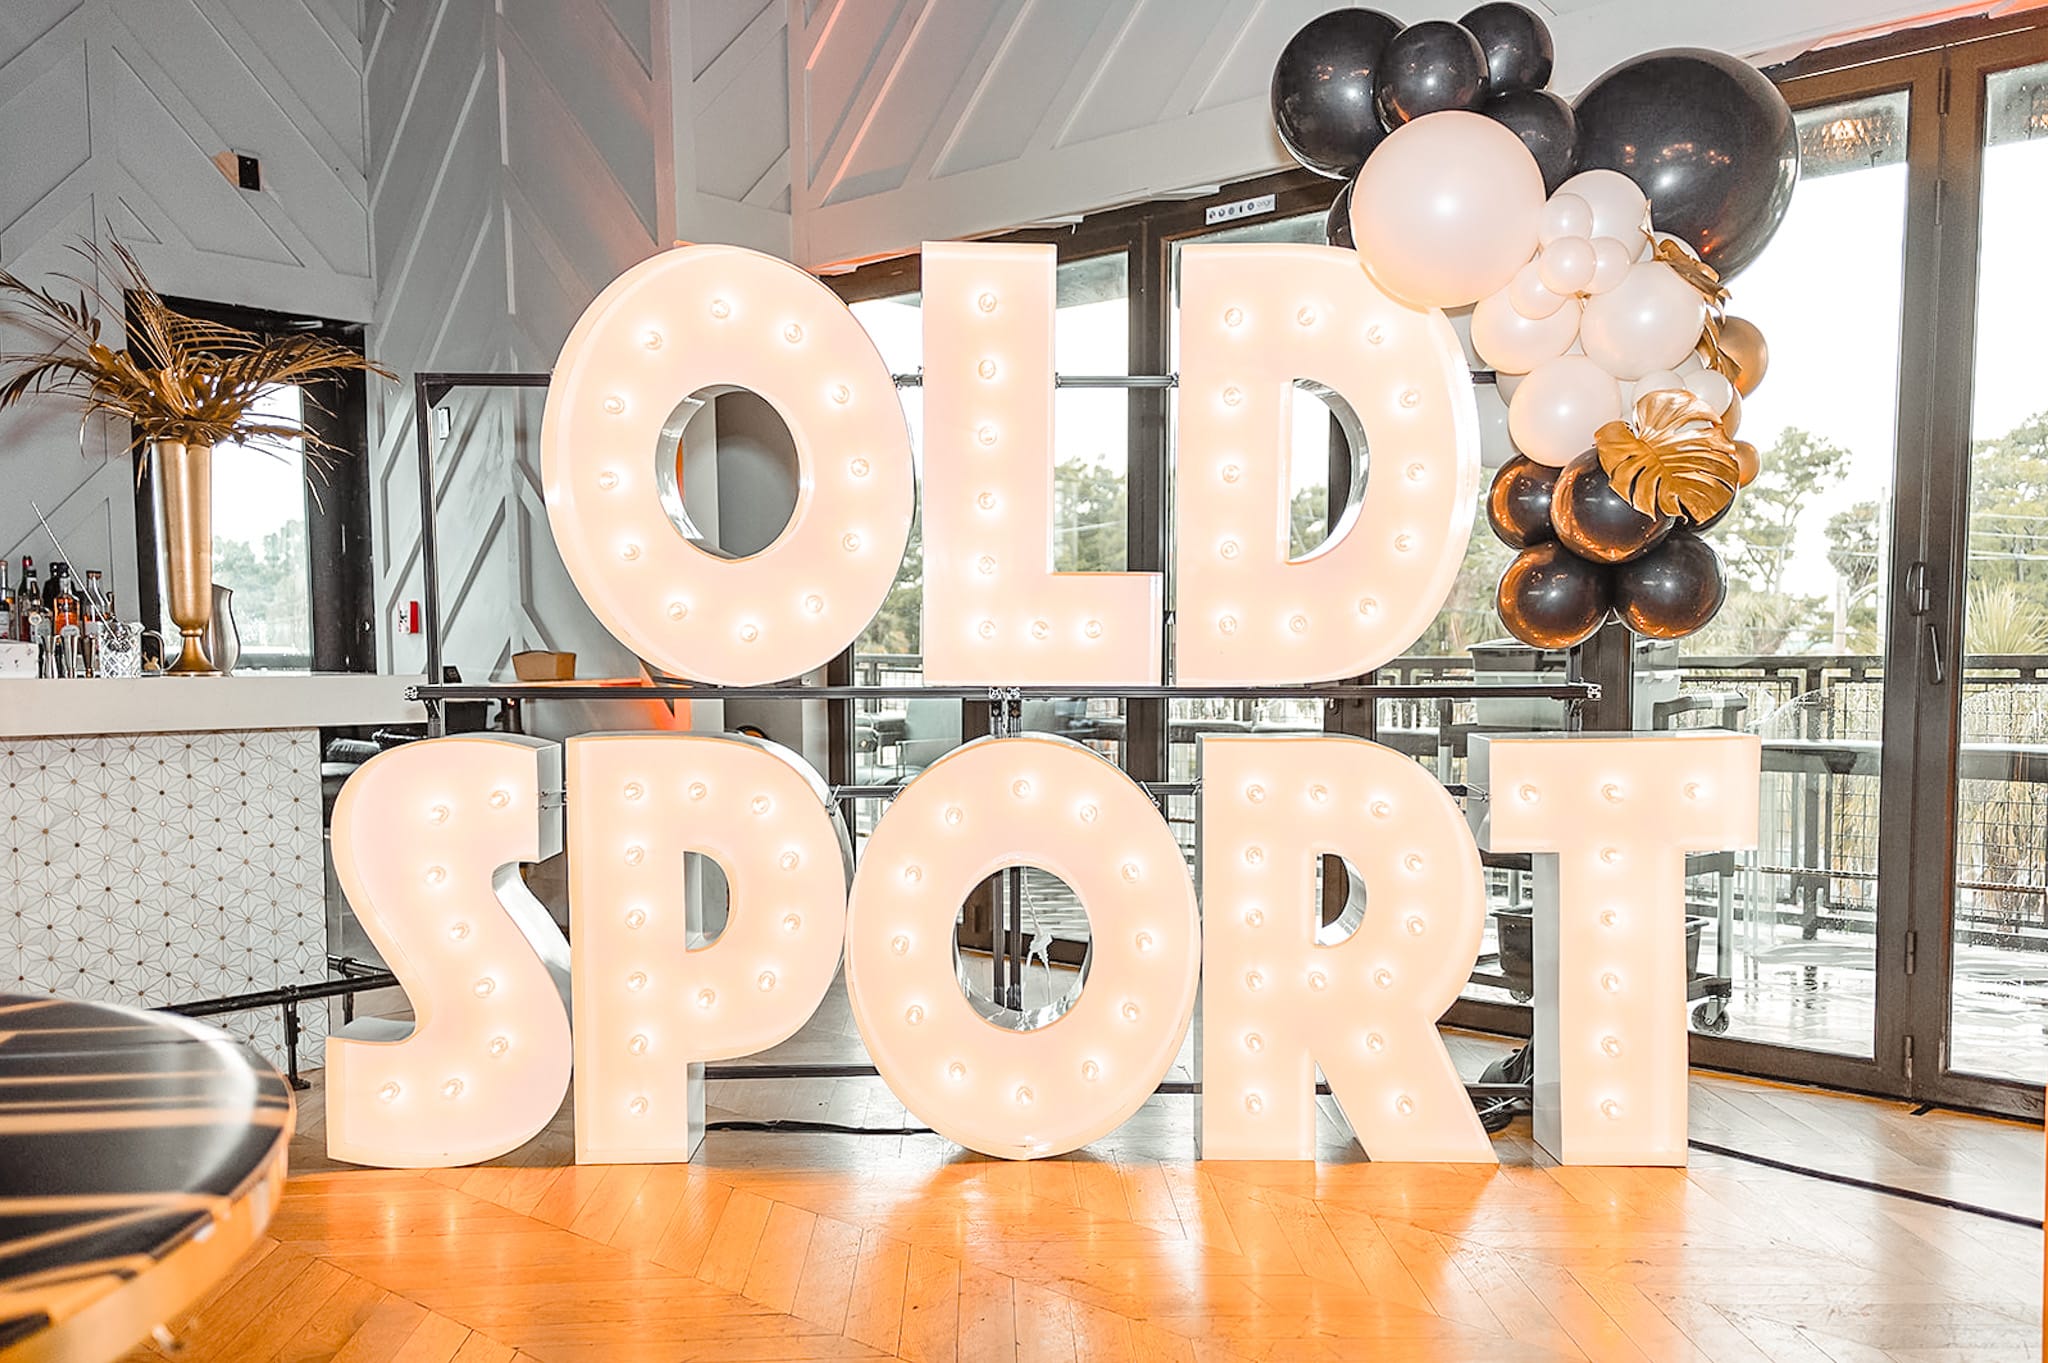 A Gatsby themed party display with the marquee letters spelling out "OLD SPORT"